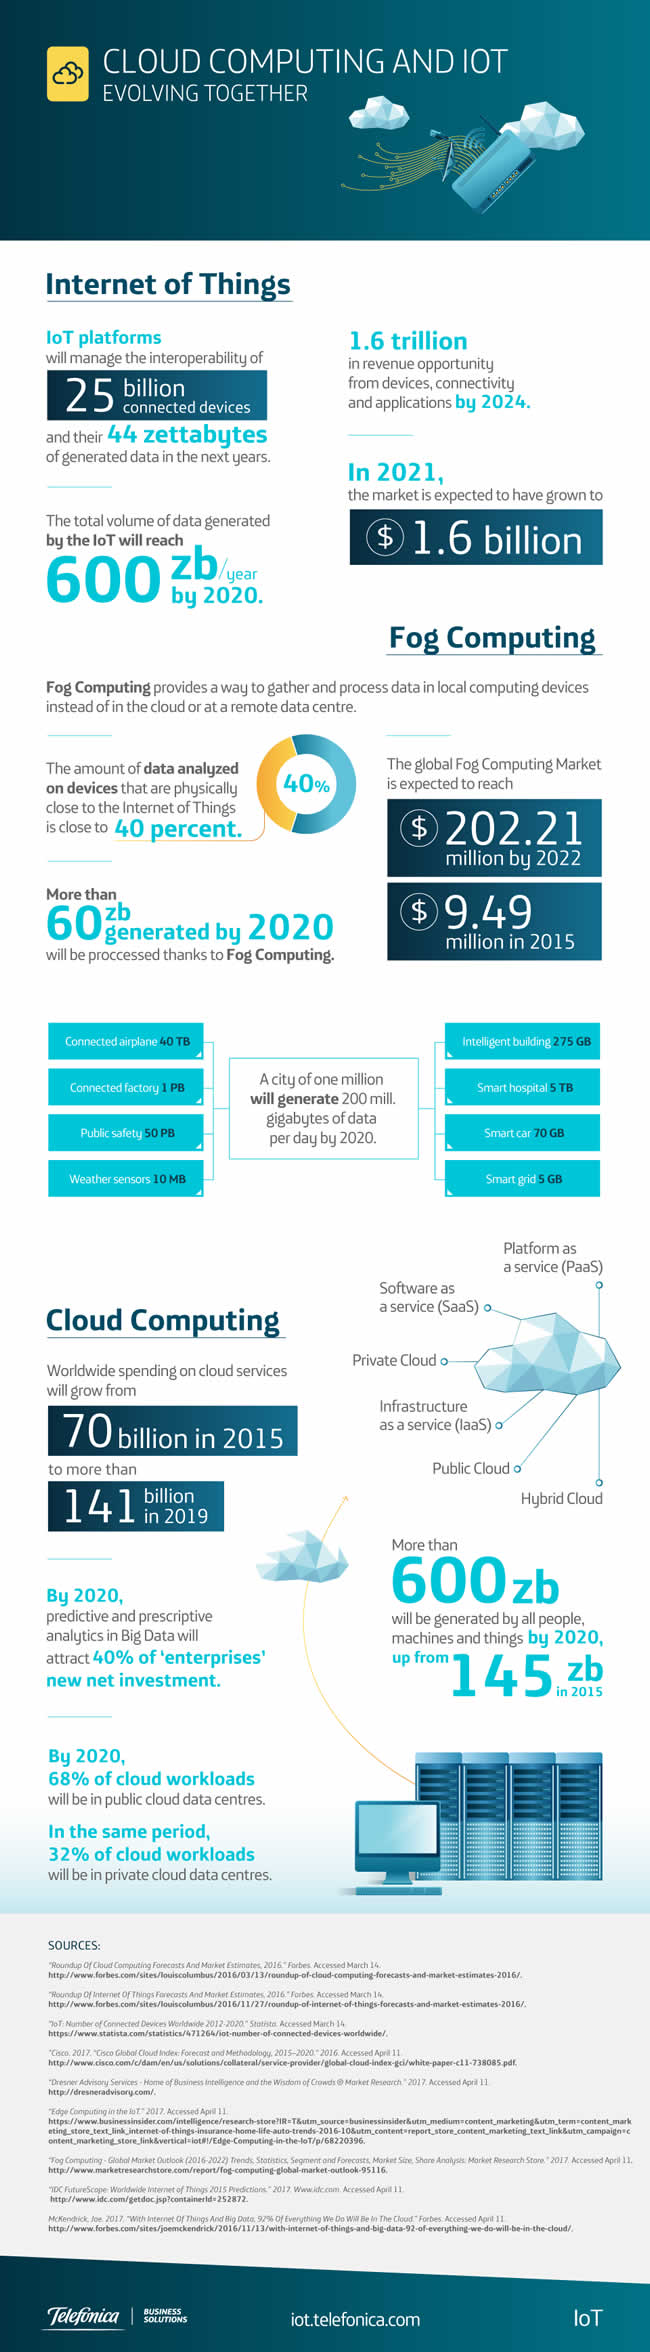 IoT platforms in a world of cloud and fog computing - infographic by Telefónica - one of the evaluated vendors in the "IDC MarketScape: Worldwide IoT Platforms (Device and Network Connectivity Providers) 2018 Vendor Assessment" - infographic source and courtesy Telefónica IoT